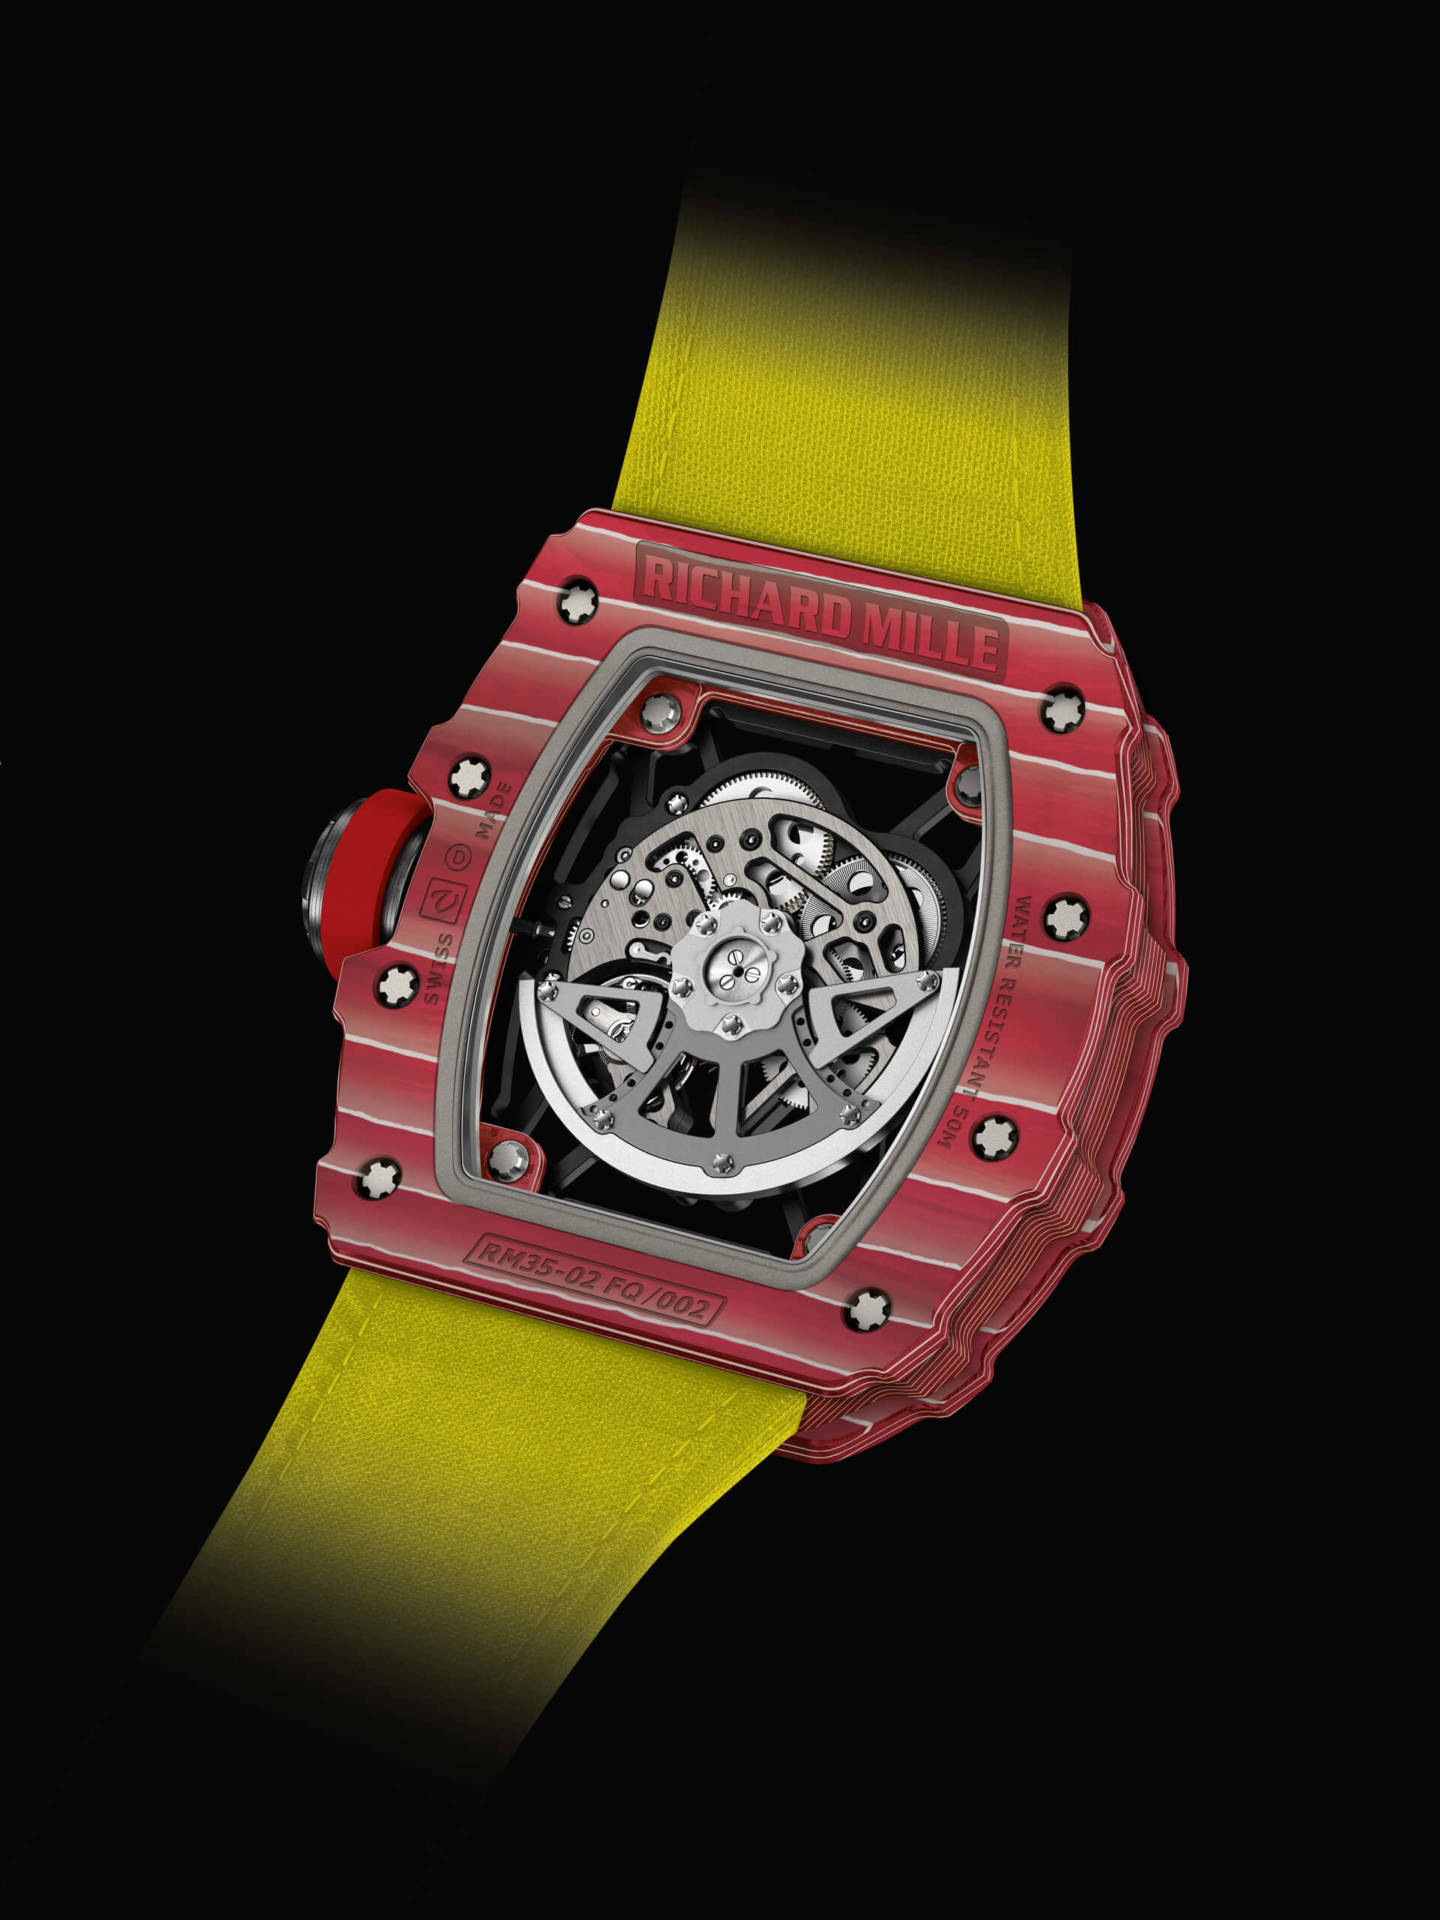 The Rafael Nadal RM3502 Watch by Richard Mille